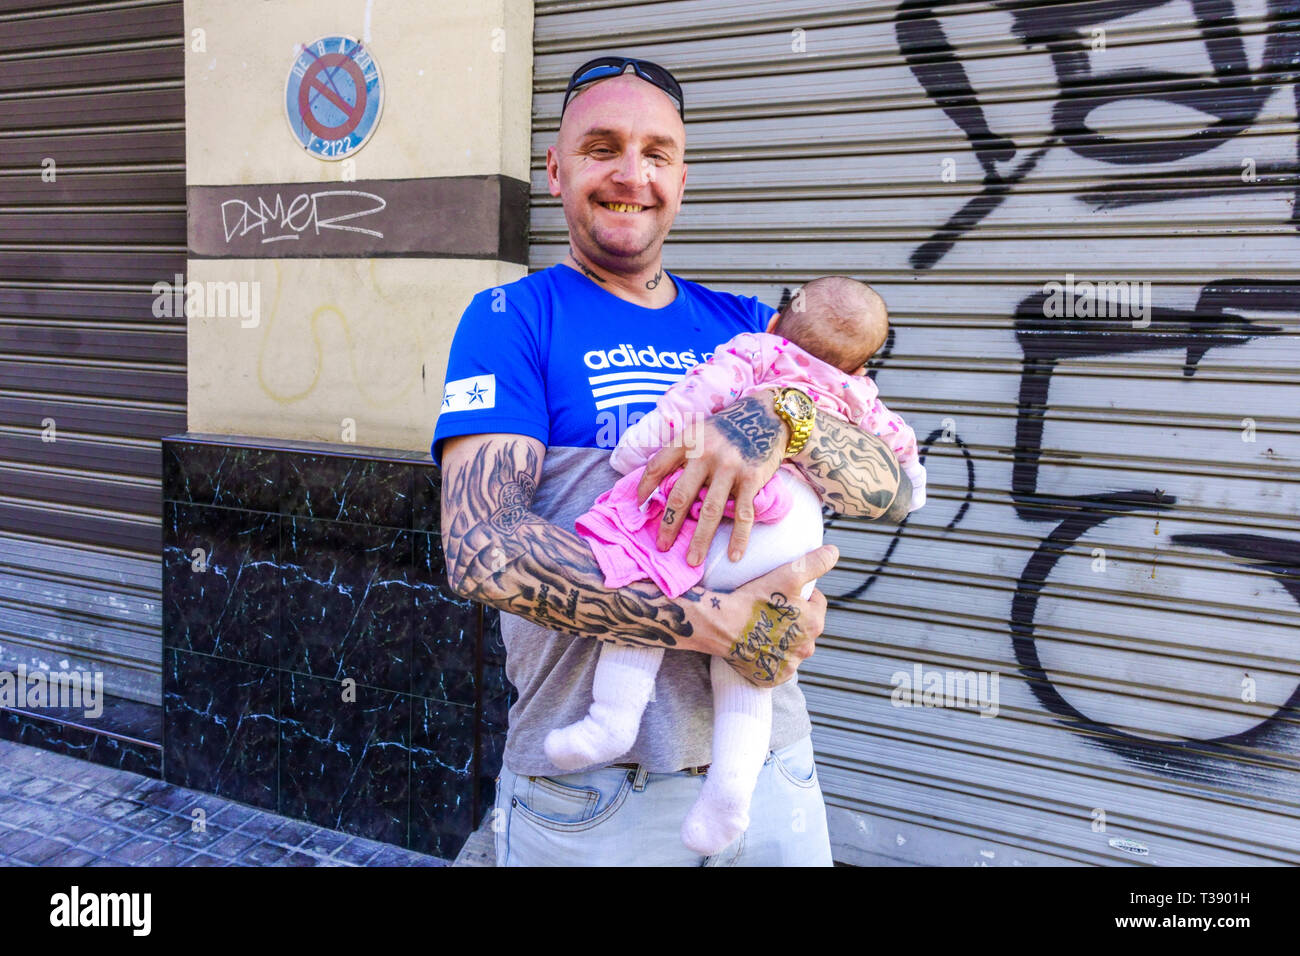 Portrait of a happy father with daughter, Valencia, El Botanico barrio, Spain Europe Stock Photo